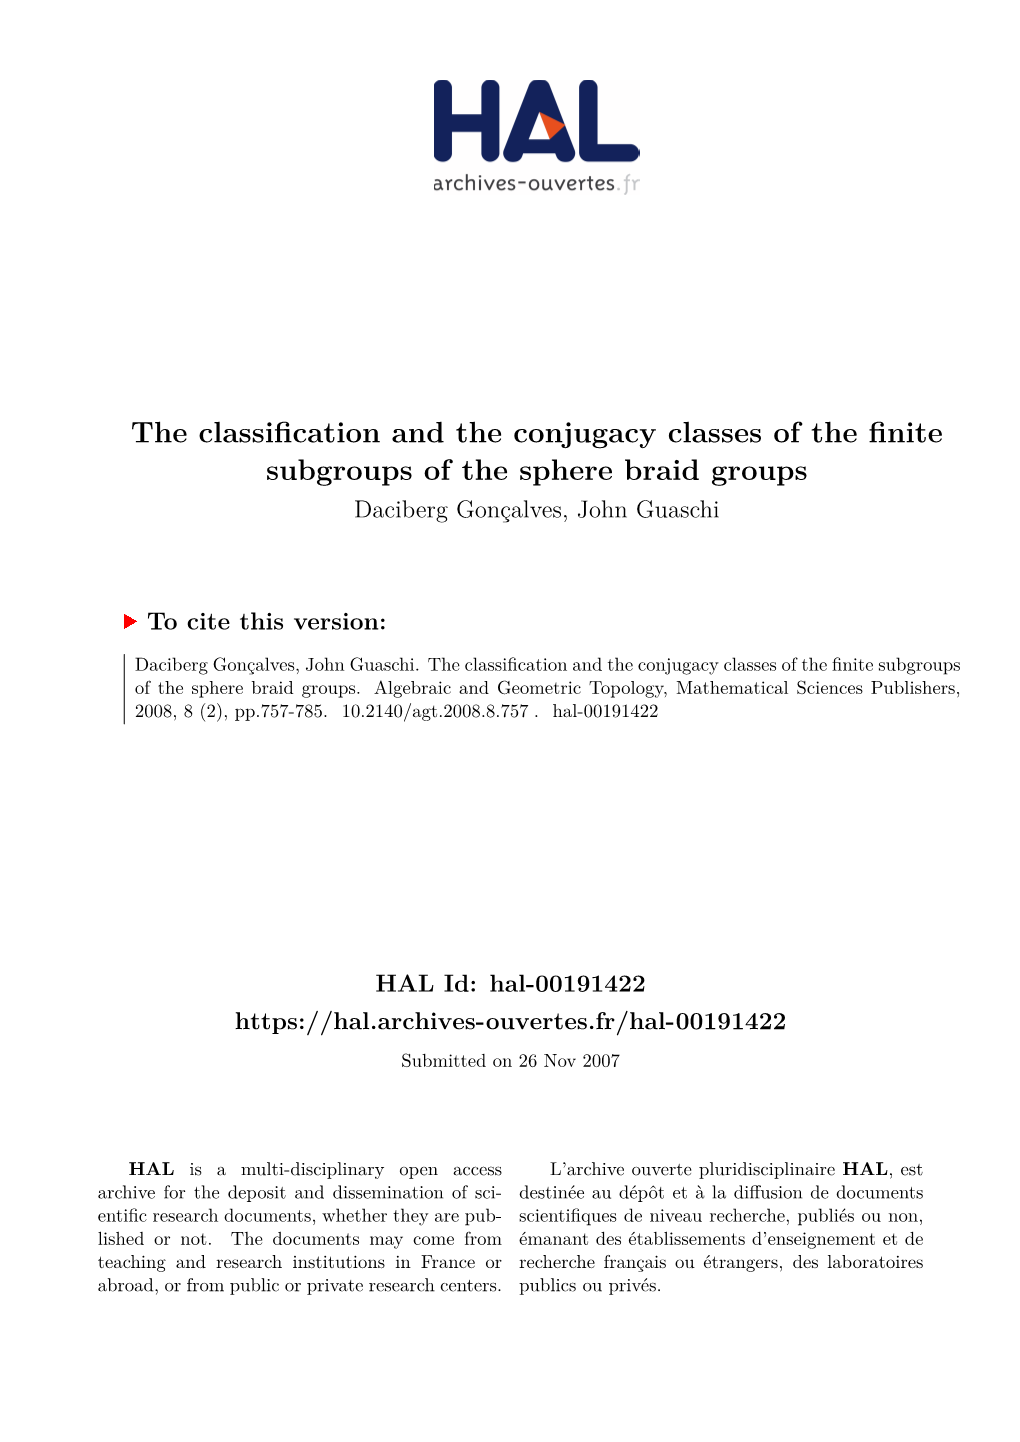 The Classification and the Conjugacy Classes of the Finite Subgroups of the Sphere Braid Groups Daciberg Gonçalves, John Guaschi